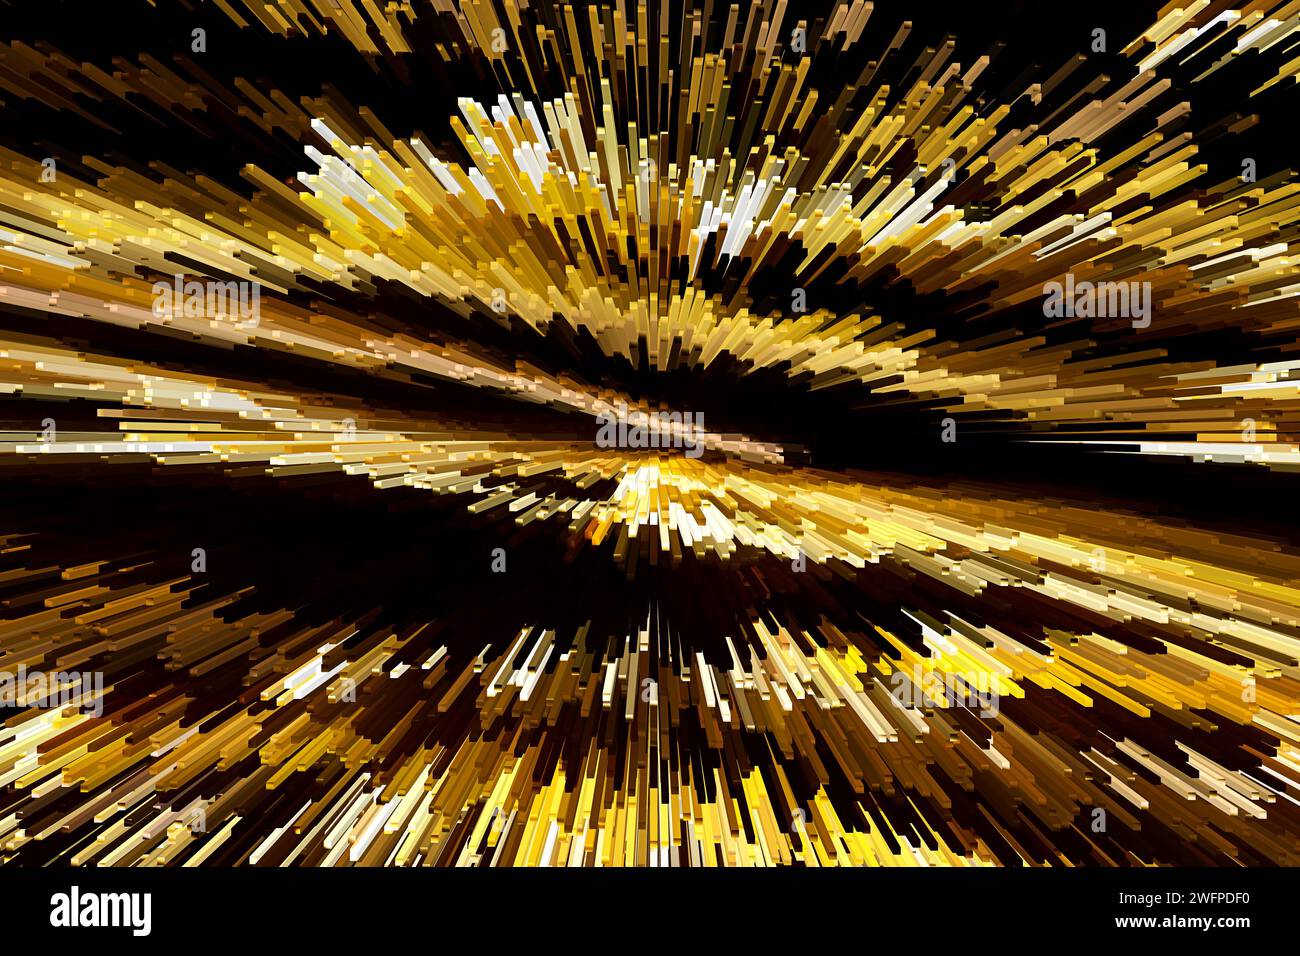 Yellow-brown-gold extrusion on black background. Blocks fly in different directions. Technology, abstract  backdrop Stock Photo